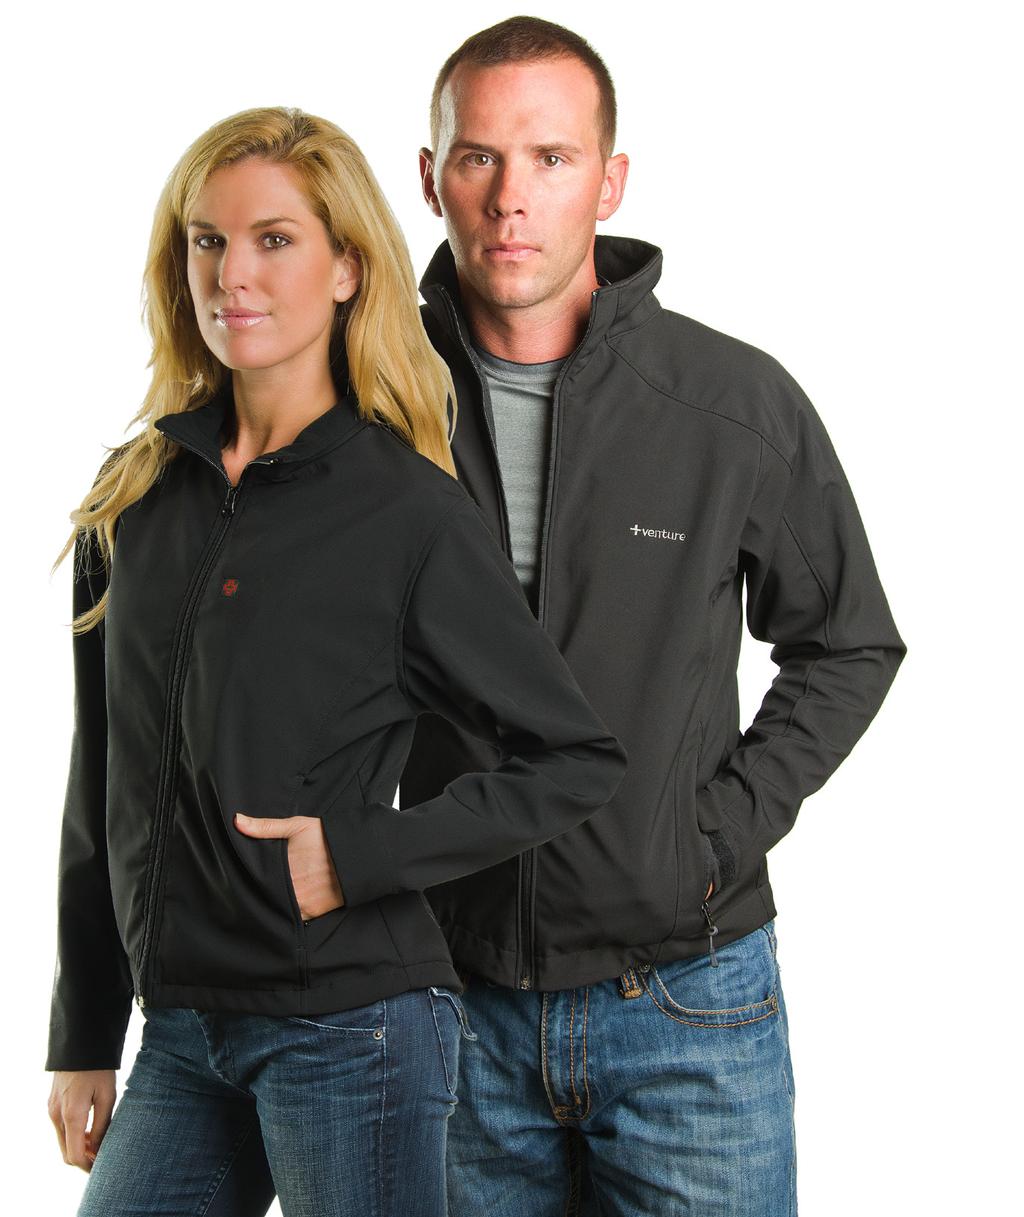 HEATED CLOTHING Venture Heat is the industry s leader in heated